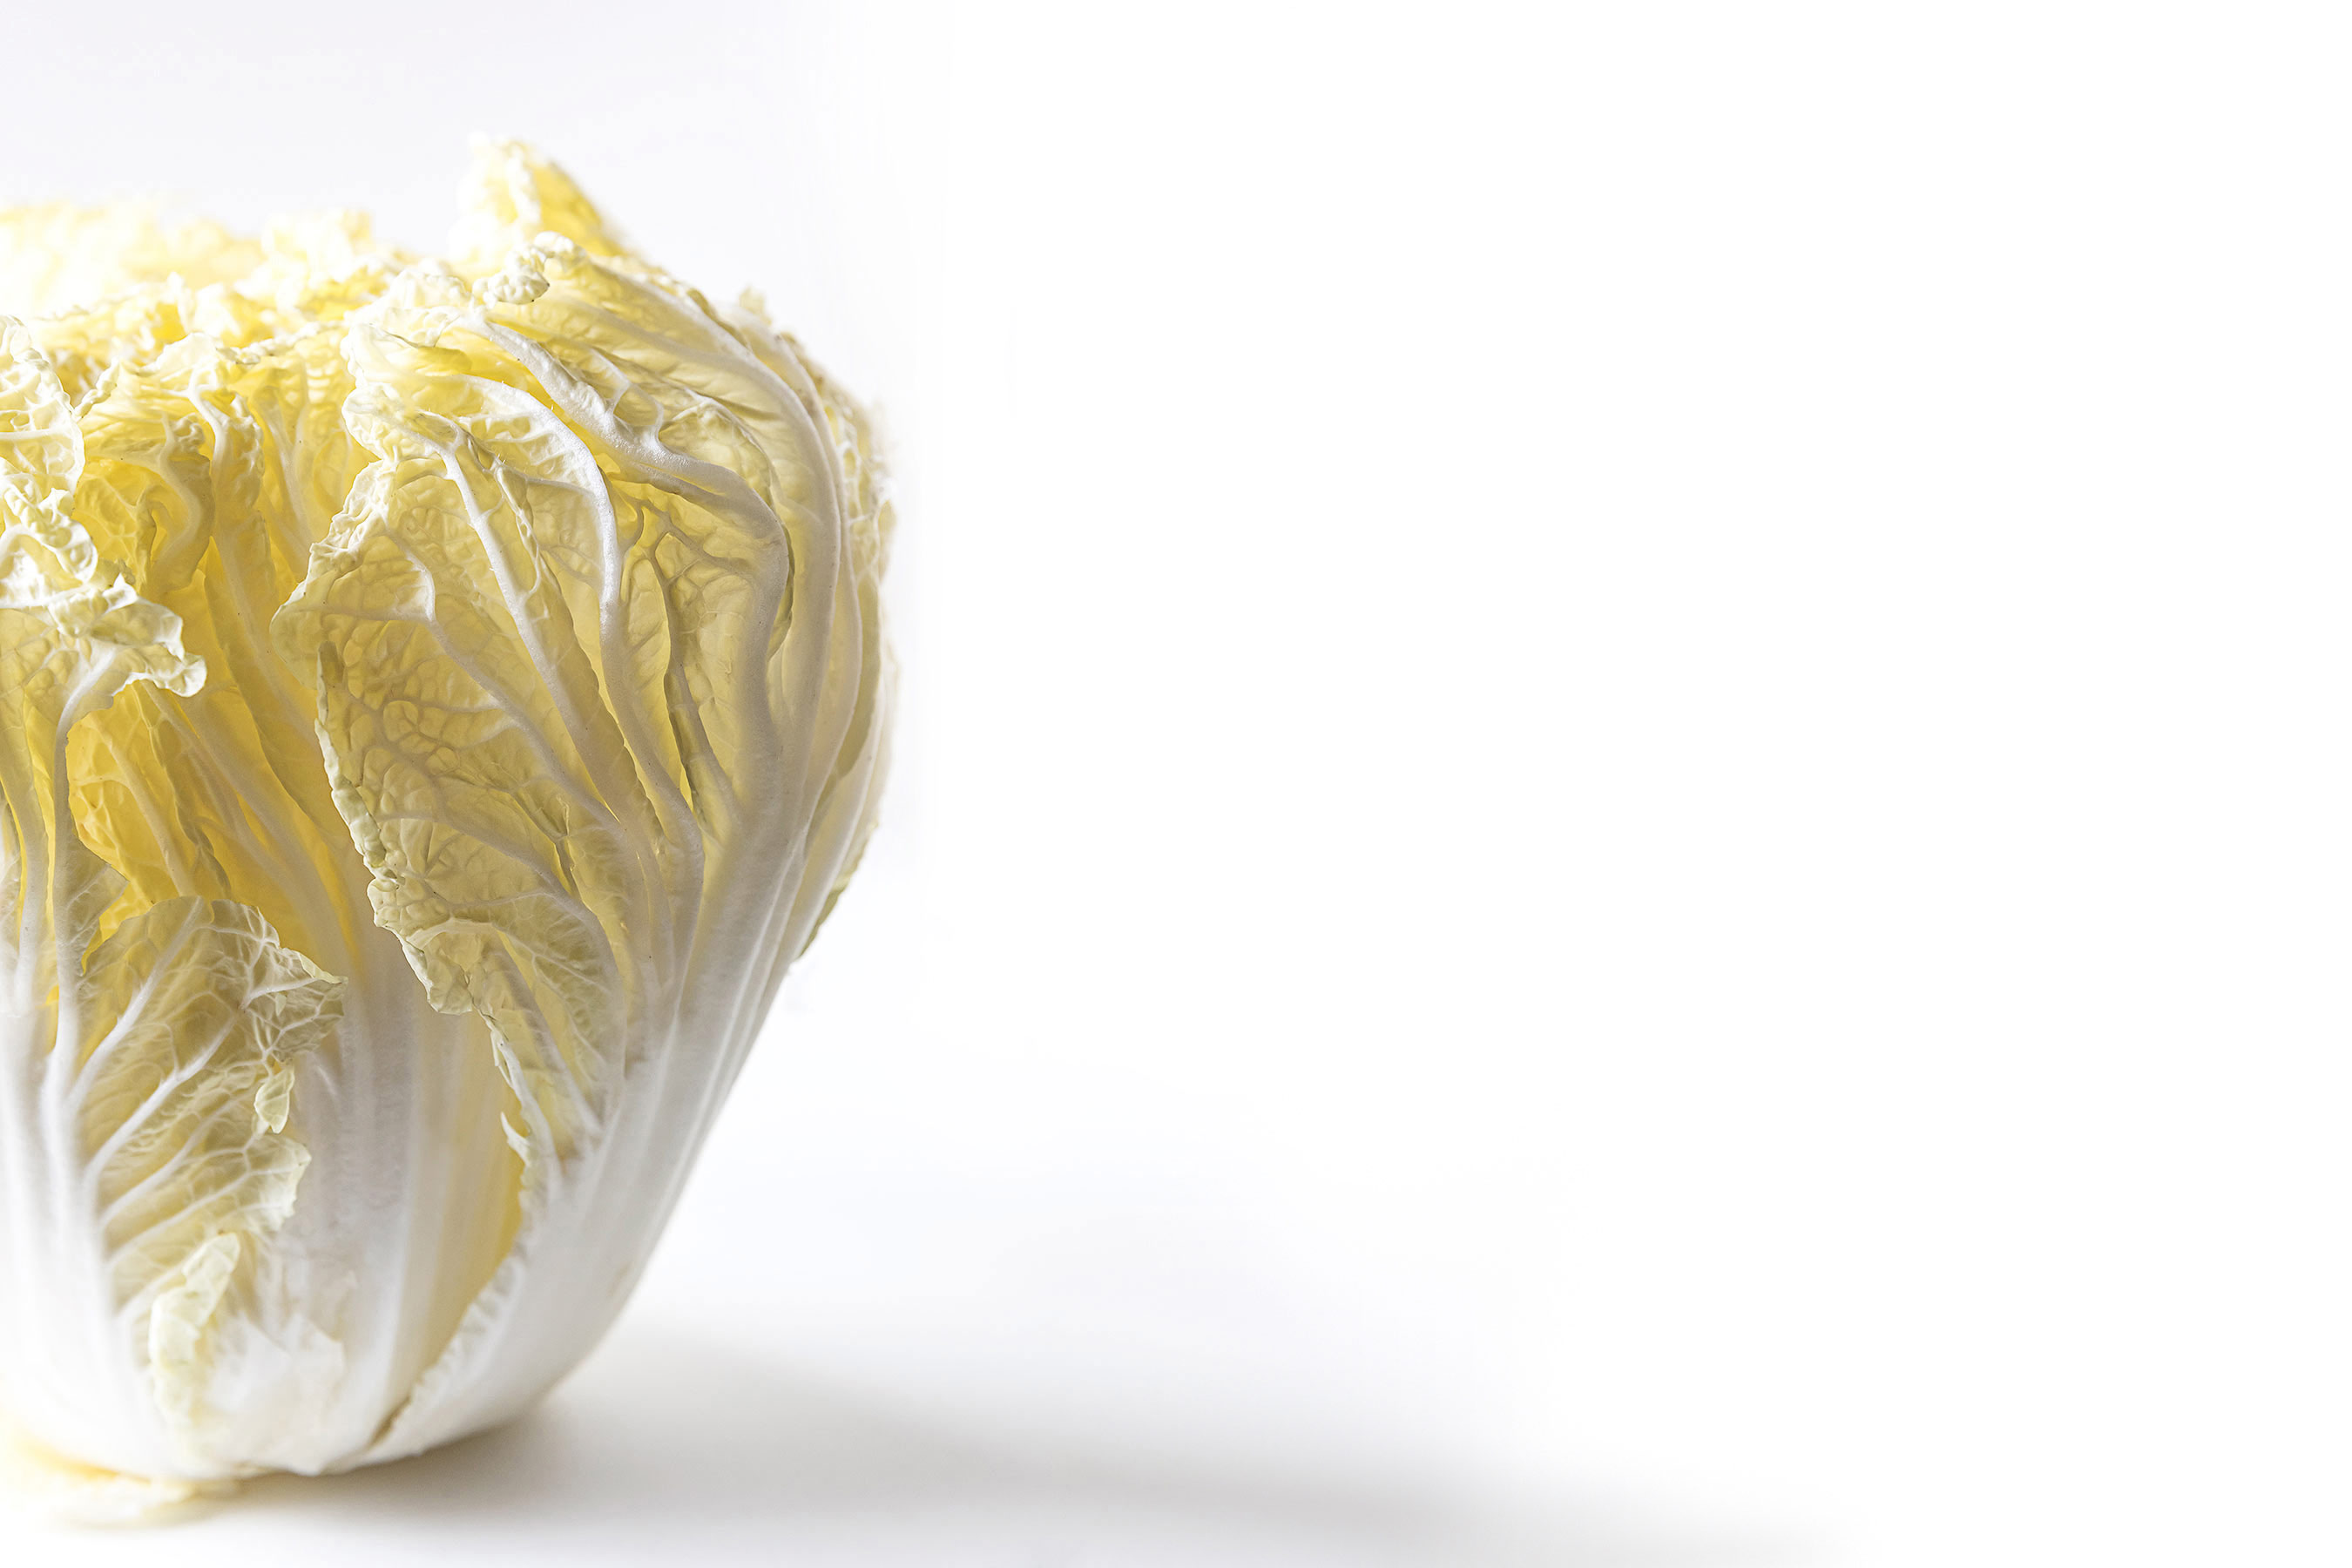 Glanger Photography | white cabbage on white surface with backlight